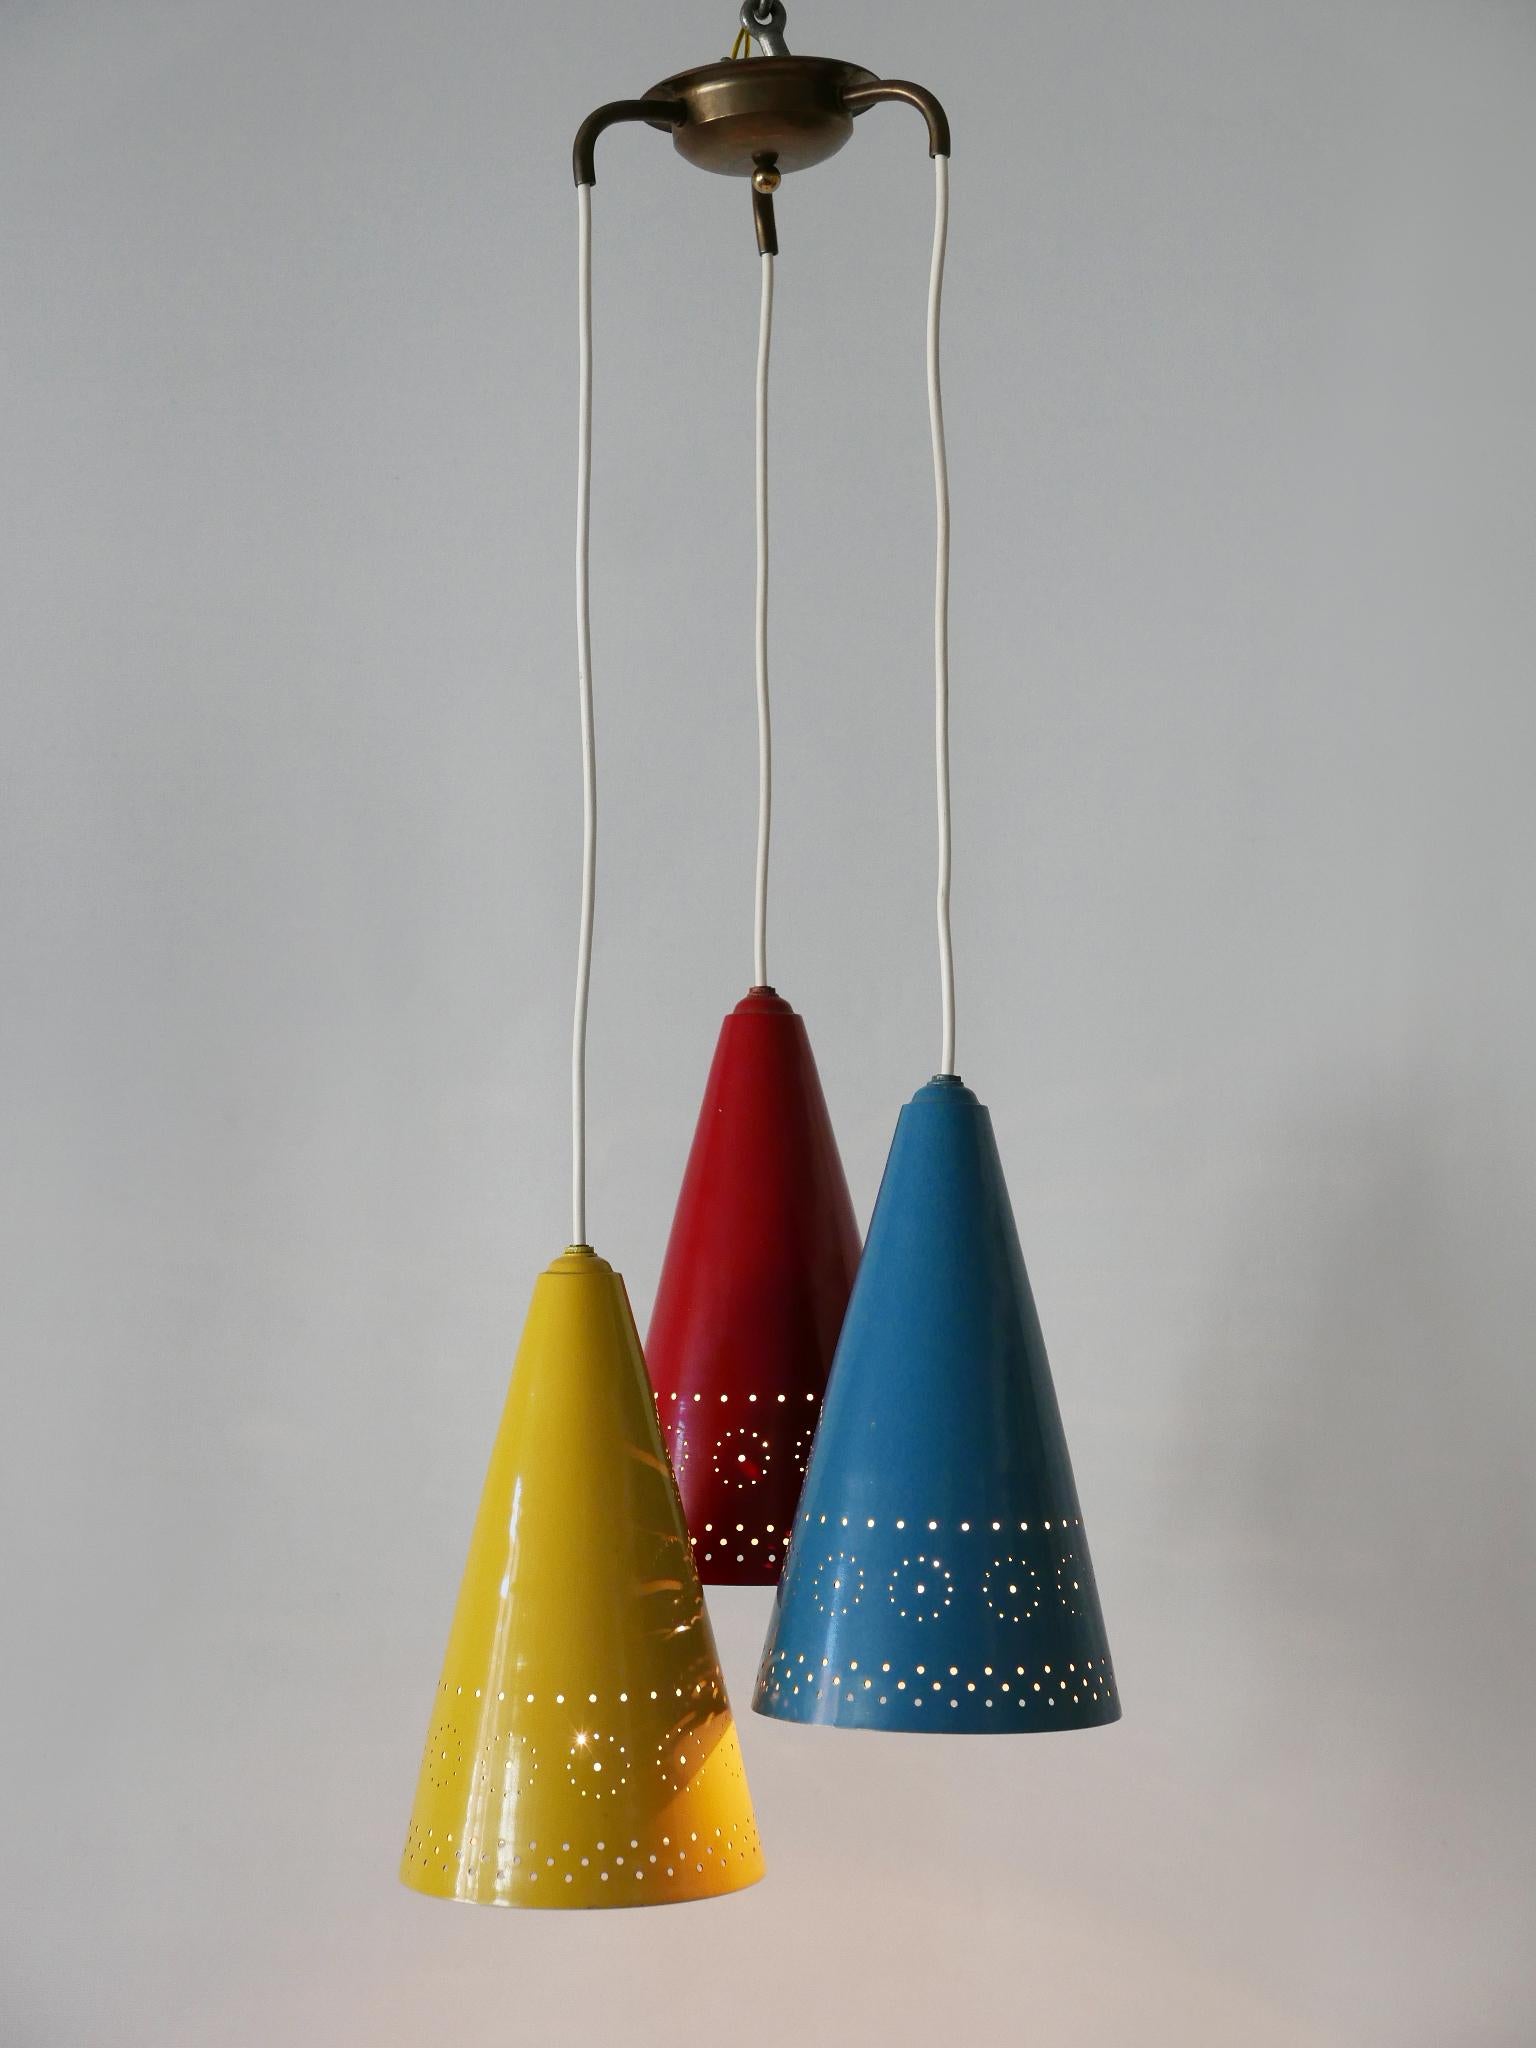 Exceptional, highly decorative Mid-Century Modern pendant lamp or hanging light with three lamp shades. Designed and manufactured in Germany, 1960s.

Executed in blue, red and yellow enameled and perforated aluminum and brass, the cascading pendant